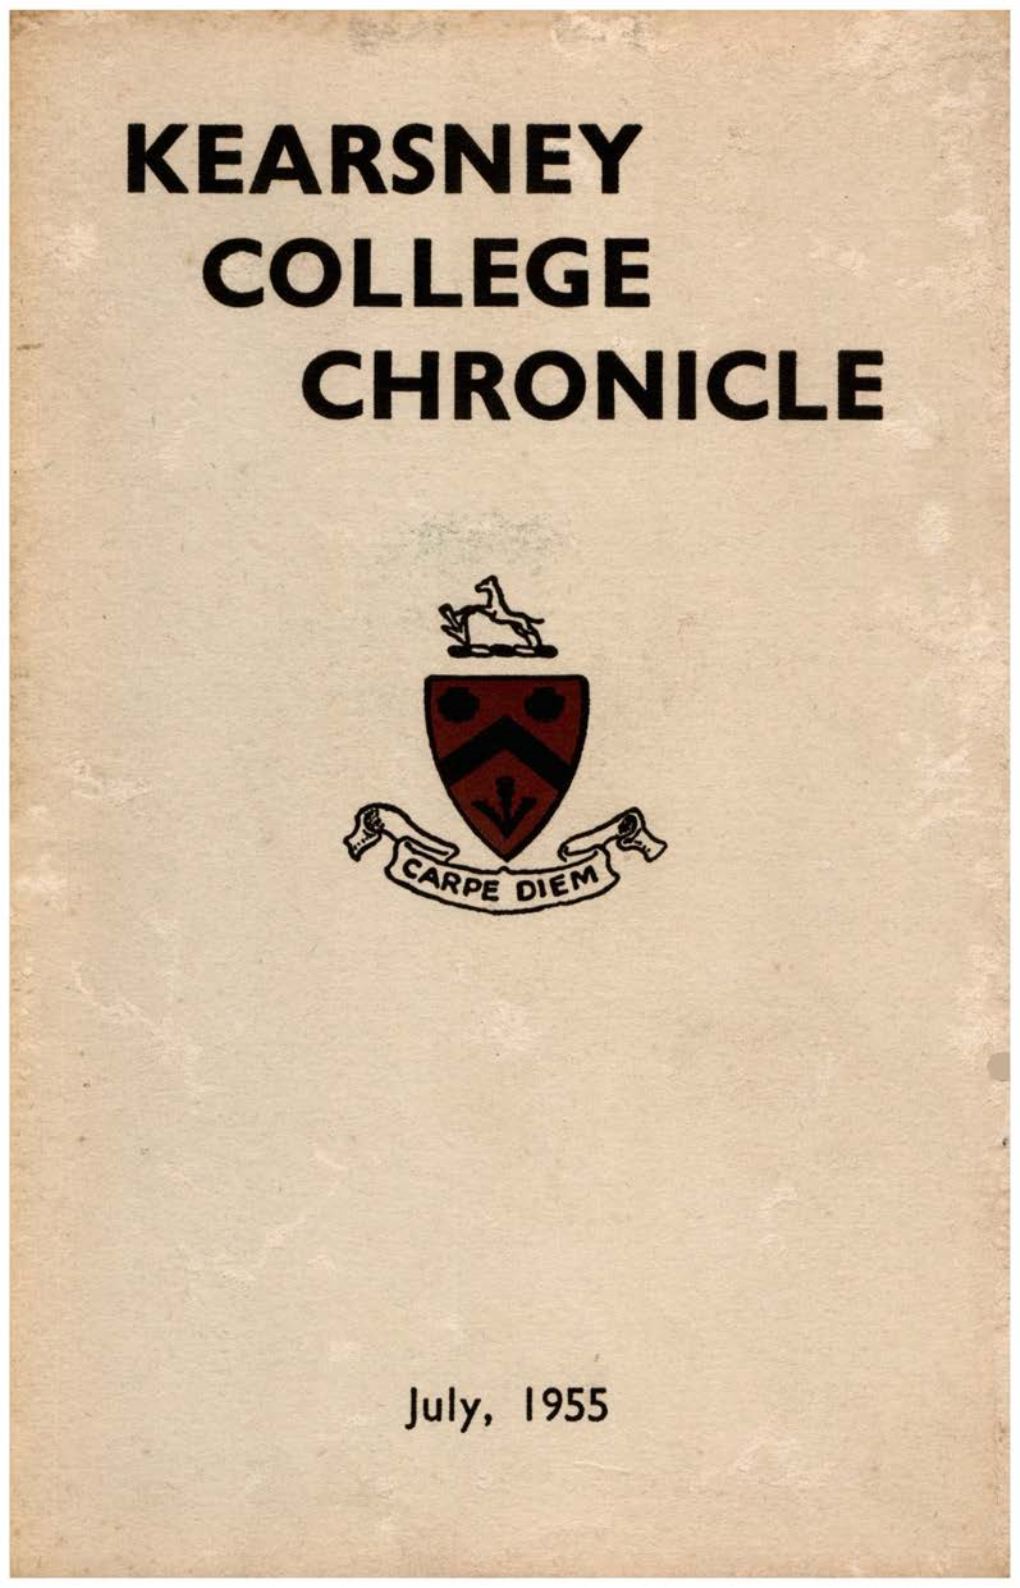 Chronicle for 1955